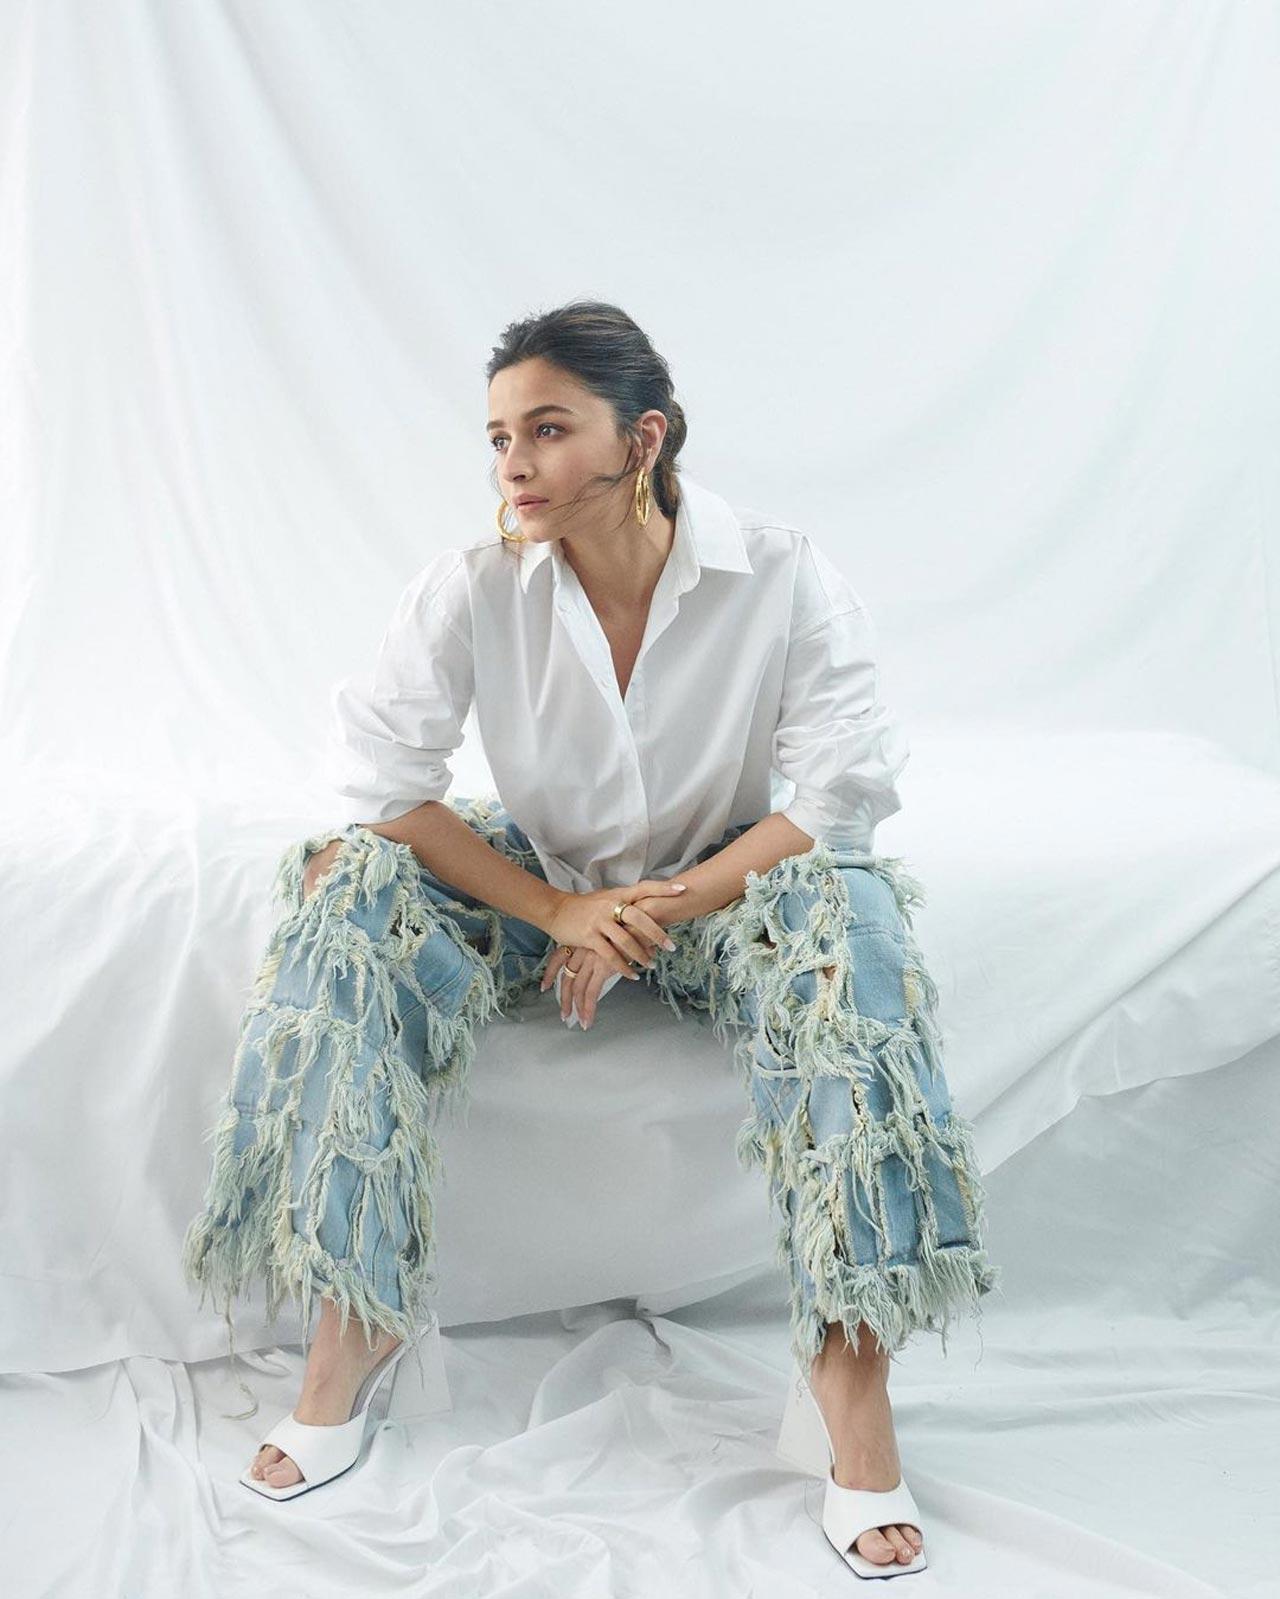 A crisp white shirt and a pair of blue denim can never go wrong, and that's what Alia Bhatt's stylist has considered as she picked an outfit for 'Darlings' promotional event